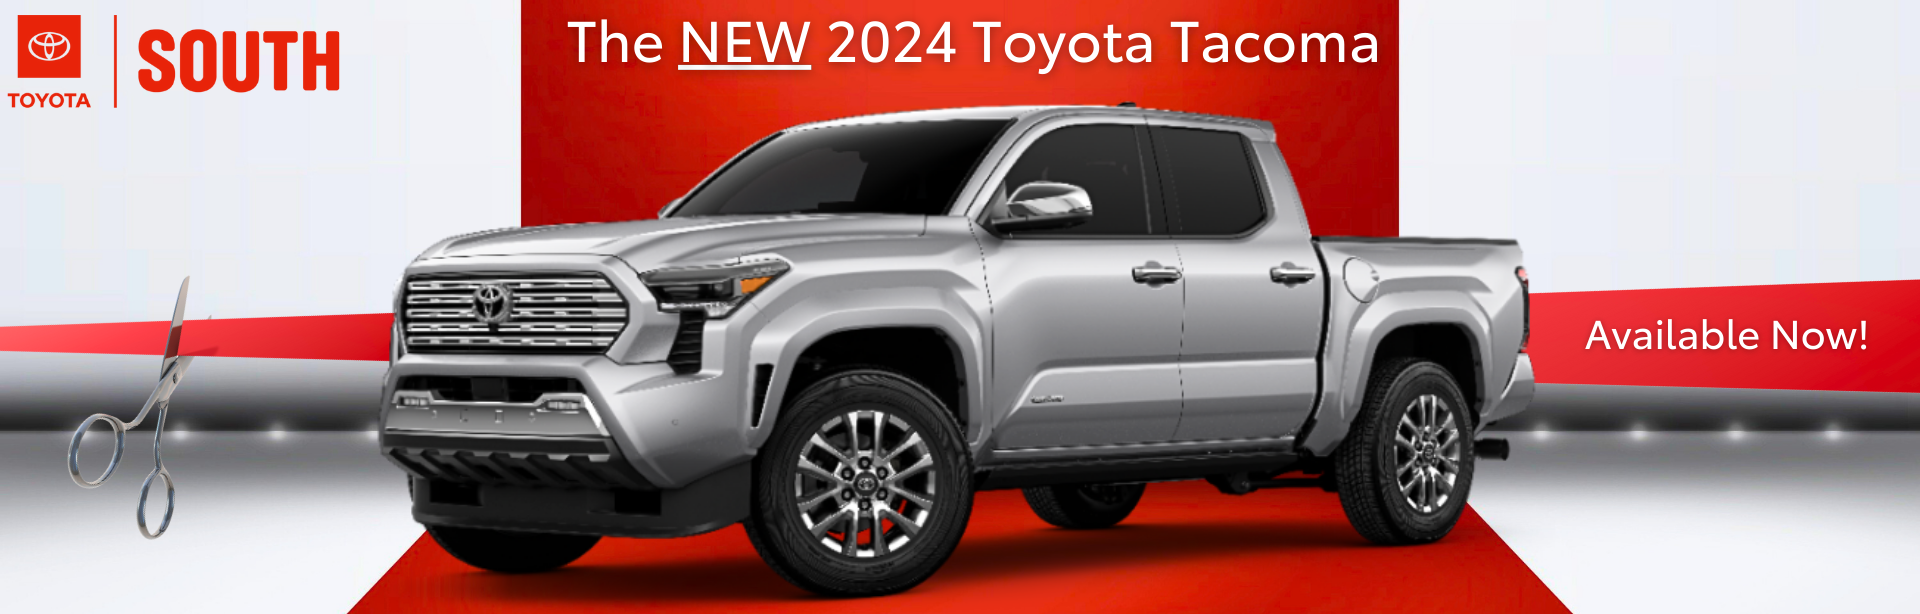 The NEW Tacoma at Toyota South in Richmond, KY